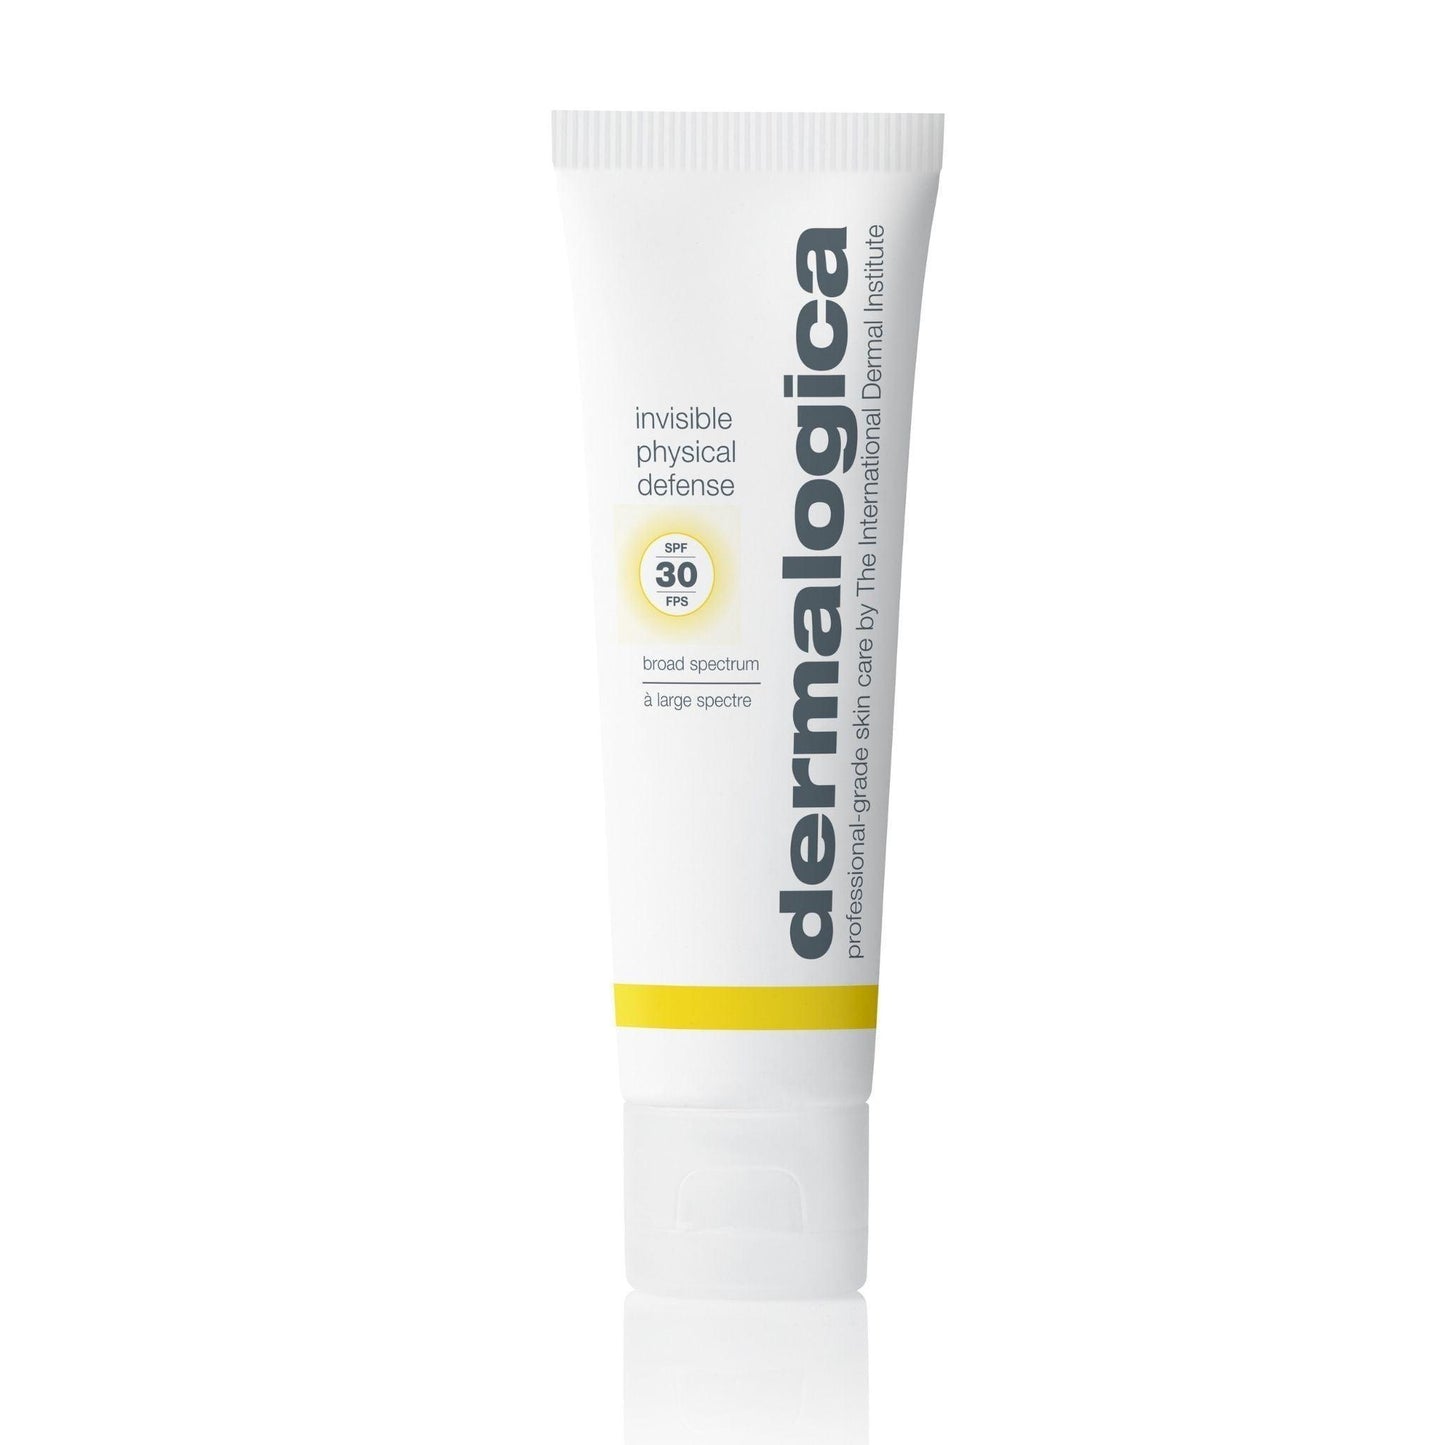 invisible physical defense mineral sunscreen spf30 - Dermalogica Singapore